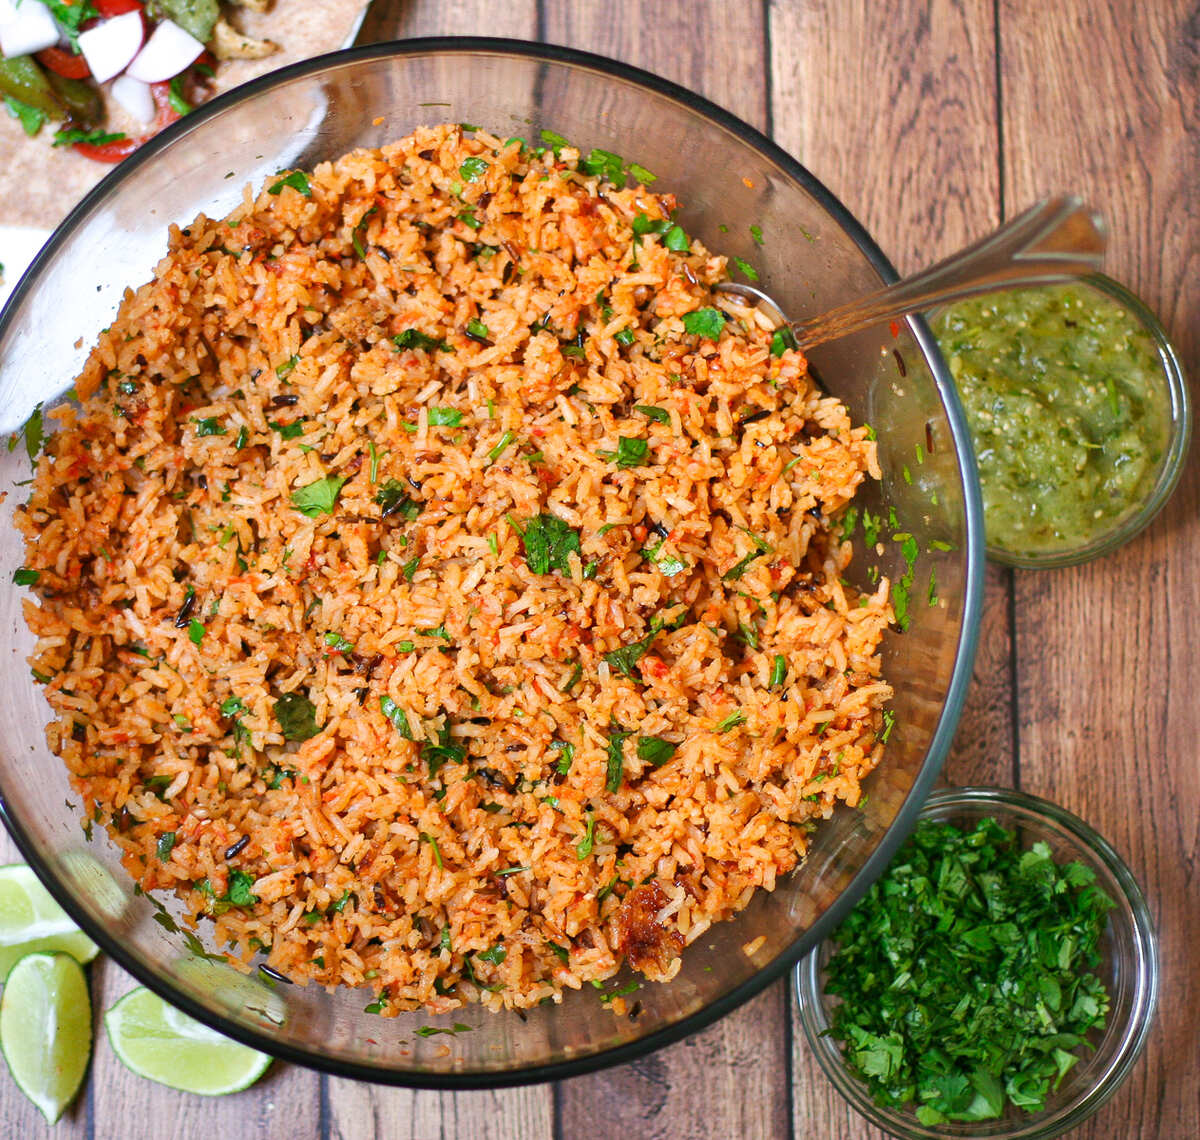 How To Make Spanish Rice In A Rice Cooker